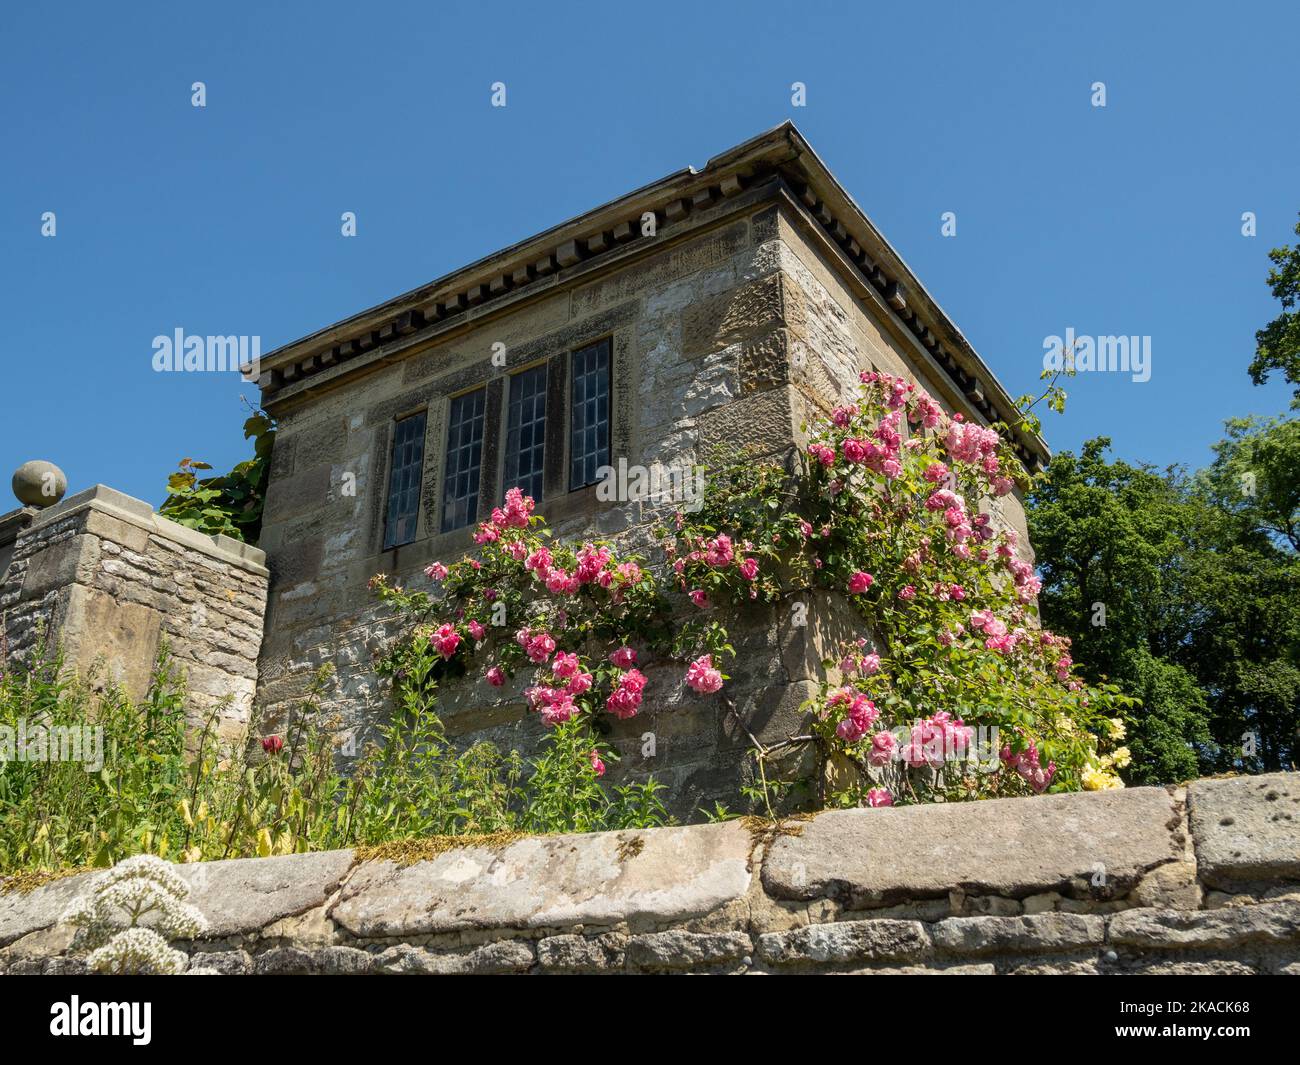 Haddon Hall, a medieval manor house dating from 11th century, Bakewell, Derbyshire, UK; climbing roses on the outside of a summerhouse Stock Photo